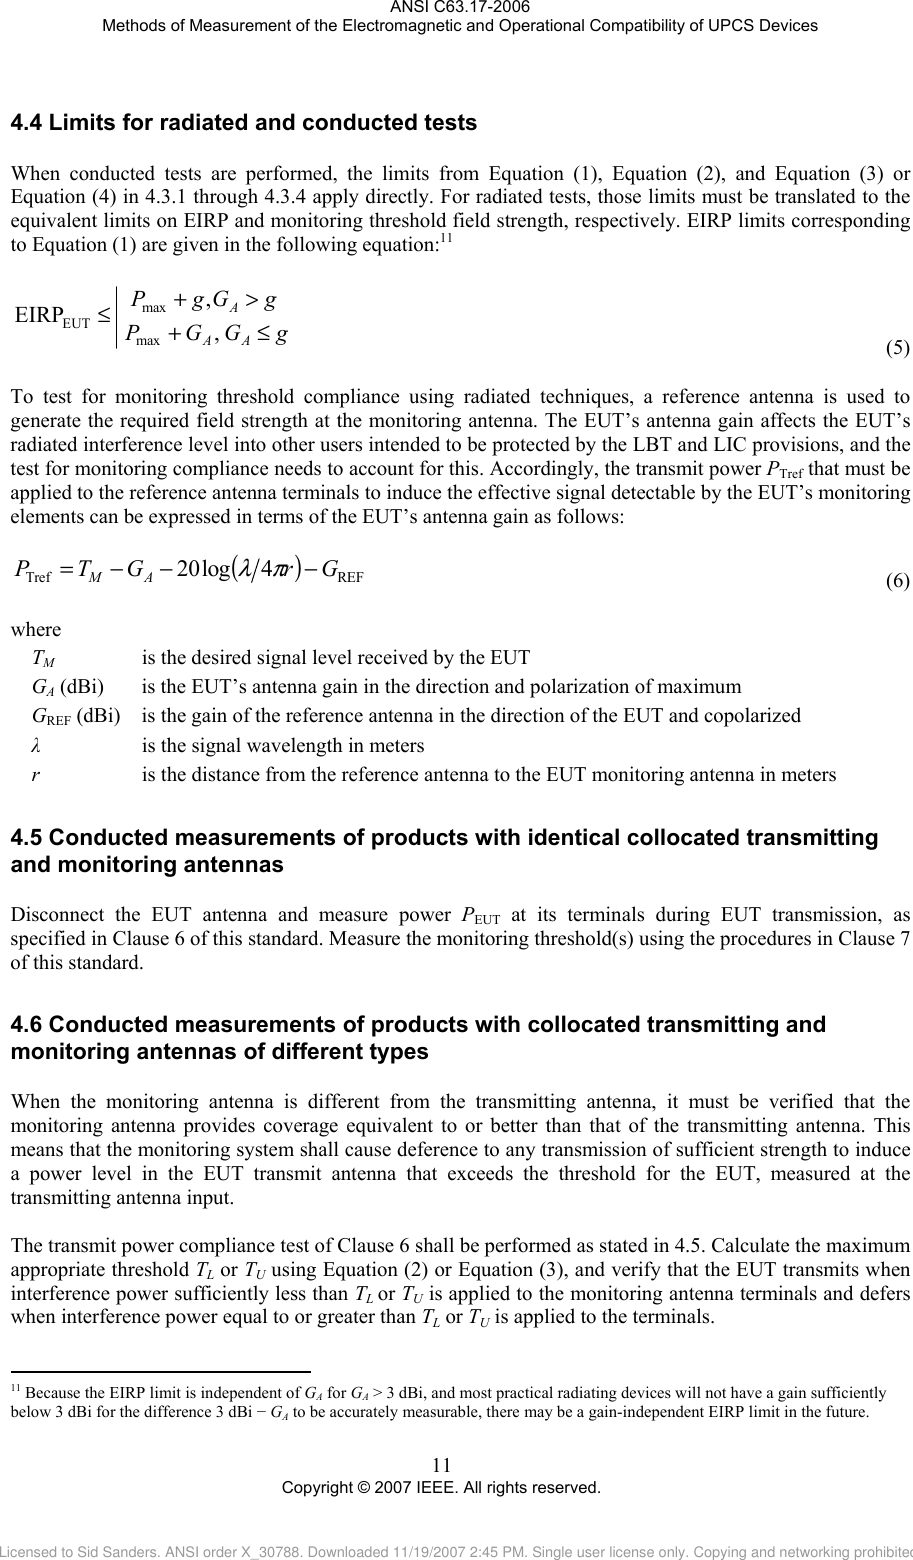 ANSI C63.17-2006 Methods of Measurement of the Electromagnetic and Operational Compatibility of UPCS Devices 4.4 Limits for radiated and conducted tests When conducted tests are performed, the limits from Equation (1), Equation (2), and Equation (3) or Equation (4) in 4.3.1 through 4.3.4 apply directly. For radiated tests, those limits must be translated to the equivalent limits on EIRP and monitoring threshold field strength, respectively. EIRP limits corresponding to Equation (1) are given in the following equation:11   gGGPgGgPAAA≤+&gt;+≤ , ,EIRPmaxmaxEUT (5) To test for monitoring threshold compliance using radiated techniques, a reference antenna is used to generate the required field strength at the monitoring antenna. The EUT’s antenna gain affects the EUT’s radiated interference level into other users intended to be protected by the LBT and LIC provisions, and the test for monitoring compliance needs to account for this. Accordingly, the transmit power PTref that must be applied to the reference antenna terminals to induce the effective signal detectable by the EUT’s monitoring elements can be expressed in terms of the EUT’s antenna gain as follows:  ()REFTref 4log20 GrGTP AM−−−=πλ (6) where TM      is the desired signal level received by the EUT GA (dBi)   is the EUT’s antenna gain in the direction and polarization of maximum GREF (dBi)   is the gain of the reference antenna in the direction of the EUT and copolarized  λ      is the signal wavelength in meters r      is the distance from the reference antenna to the EUT monitoring antenna in meters 4.54.6                                                 Conducted measurements of products with identical collocated transmitting and monitoring antennas Disconnect the EUT antenna and measure power PEUT at its terminals during EUT transmission, as specified in Clause 6 of this standard. Measure the monitoring threshold(s) using the procedures in Clause 7 of this standard.  Conducted measurements of products with collocated transmitting and monitoring antennas of different types When the monitoring antenna is different from the transmitting antenna, it must be verified that the monitoring antenna provides coverage equivalent to or better than that of the transmitting antenna. This means that the monitoring system shall cause deference to any transmission of sufficient strength to induce a power level in the EUT transmit antenna that exceeds the threshold for the EUT, measured at the transmitting antenna input.  The transmit power compliance test of Clause 6 shall be performed as stated in 4.5. Calculate the maximum appropriate threshold TL or TU using Equation (2) or Equation (3), and verify that the EUT transmits when interference power sufficiently less than TL or TU is applied to the monitoring antenna terminals and defers when interference power equal to or greater than TL or TU is applied to the terminals.   11 Because the EIRP limit is independent of GA for GA &gt; 3 dBi, and most practical radiating devices will not have a gain sufficiently below 3 dBi for the difference 3 dBi − GA to be accurately measurable, there may be a gain-independent EIRP limit in the future. 11 Copyright © 2007 IEEE. All rights reserved. Licensed to Sid Sanders. ANSI order X_30788. Downloaded 11/19/2007 2:45 PM. Single user license only. Copying and networking prohibited.